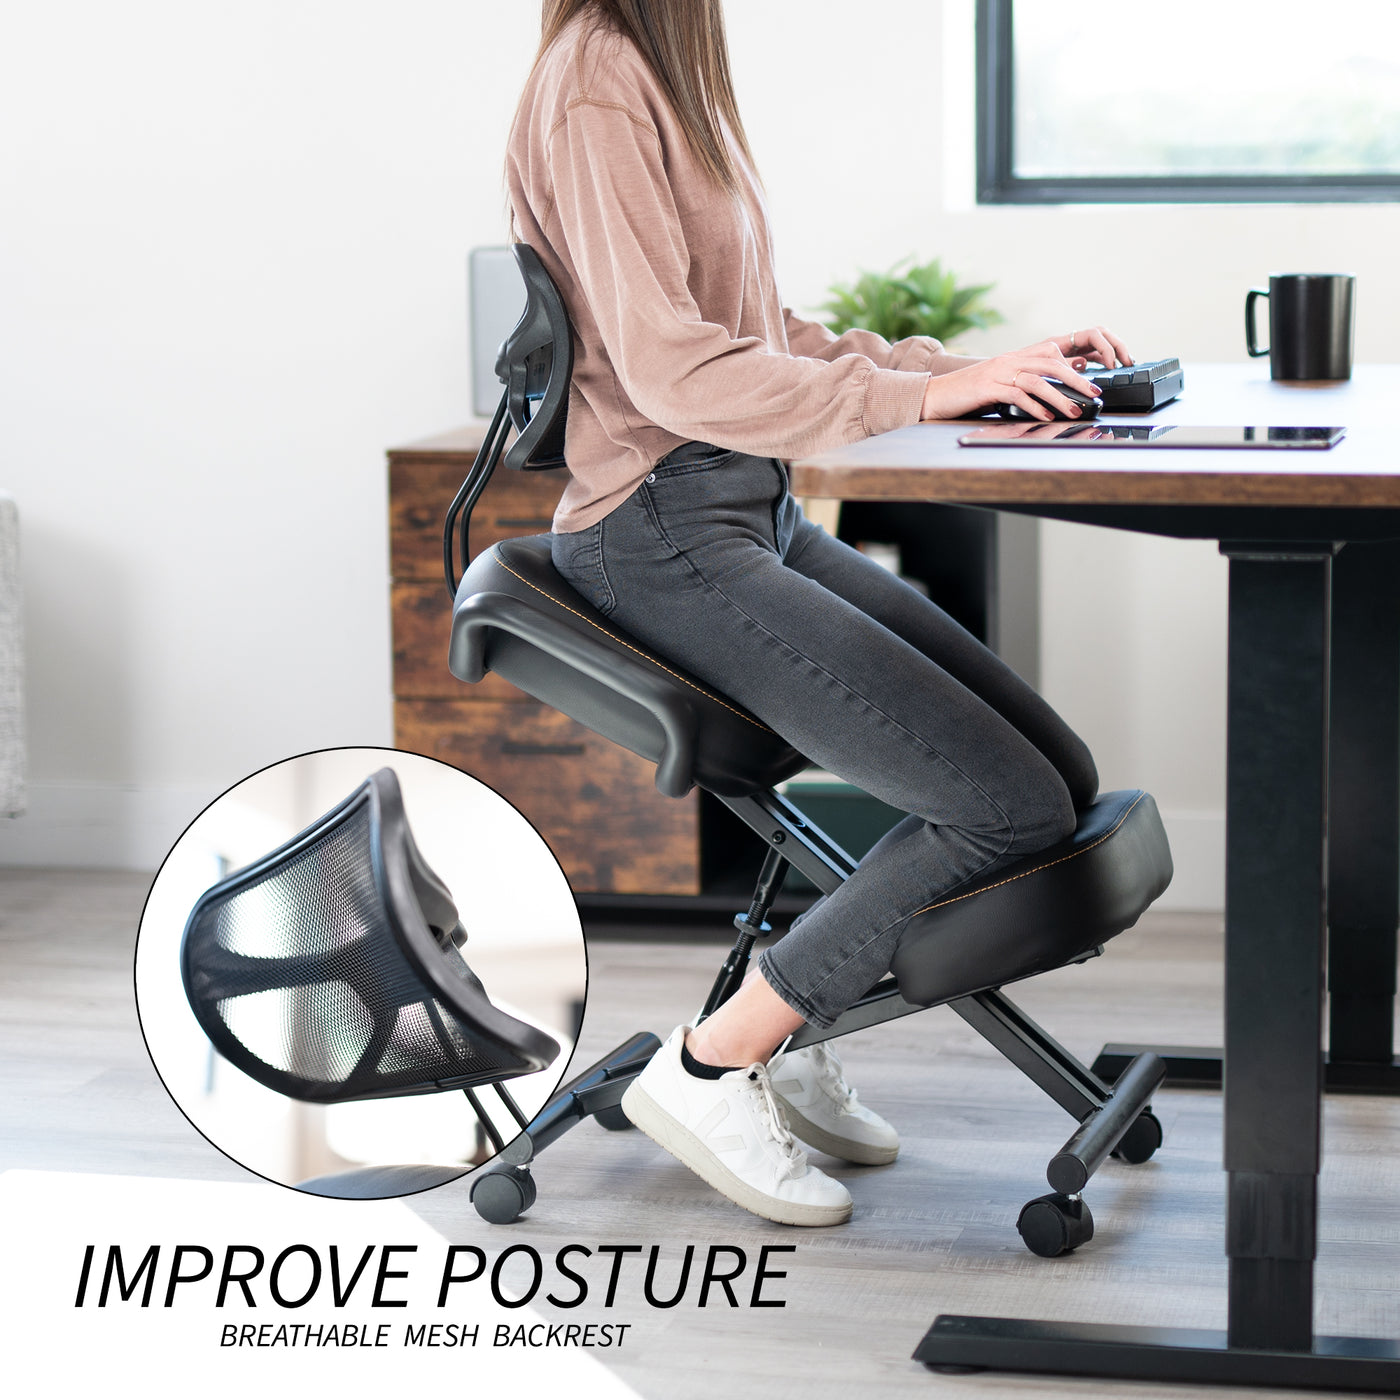 Height adjustable comfortable kneeling chair with locking caster wheels.